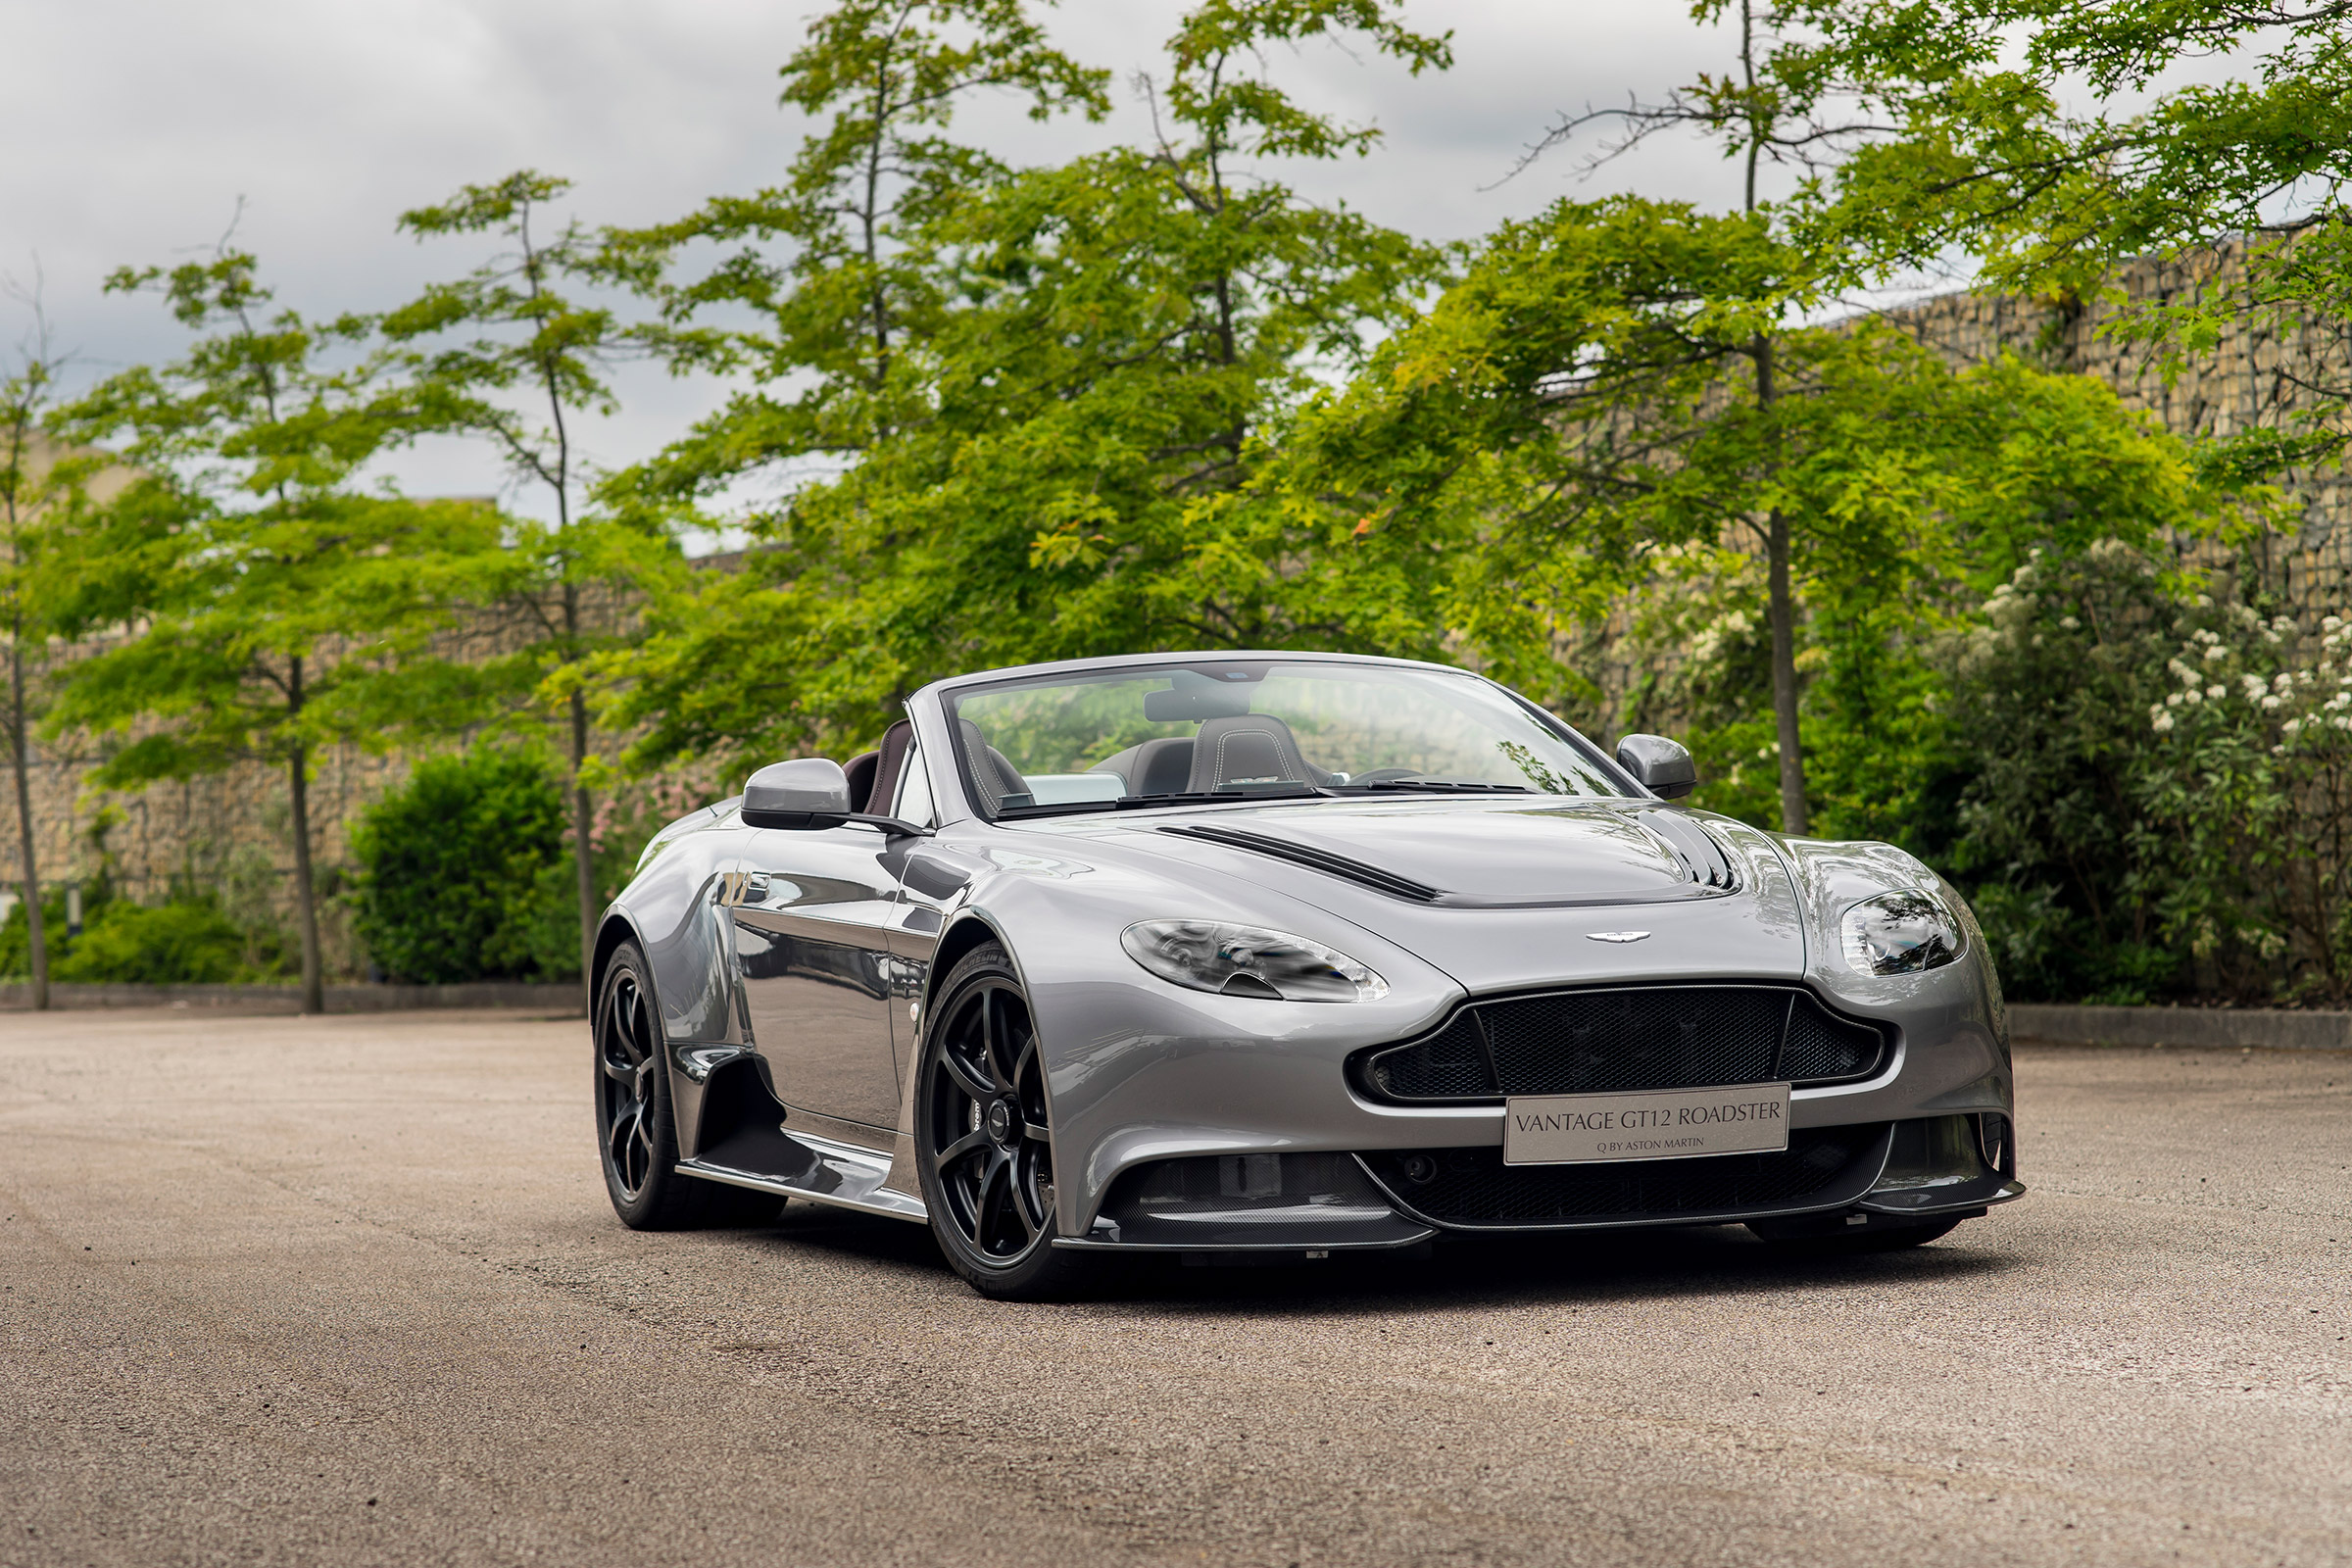 The Ultimate Driving Machine: The 2016 Aston Martin Vantage GT12 Roadster